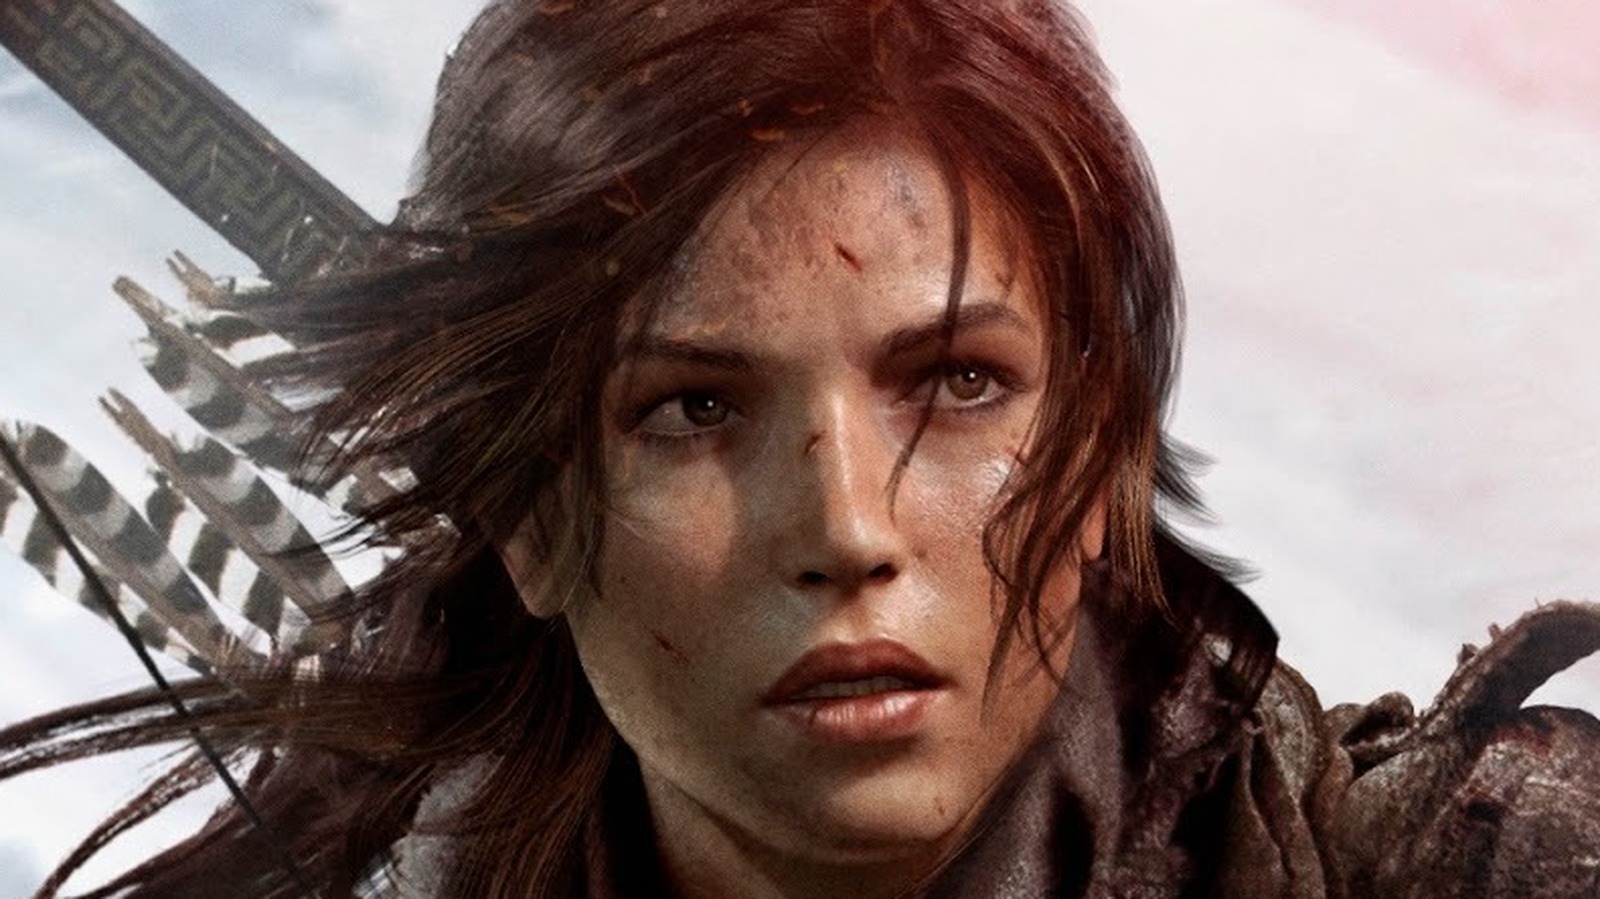 tomb raider: 'Tomb Raider: The Legend of Lara Croft': Netflix unveils  trailer for anime series. Here's what we know so far - The Economic Times